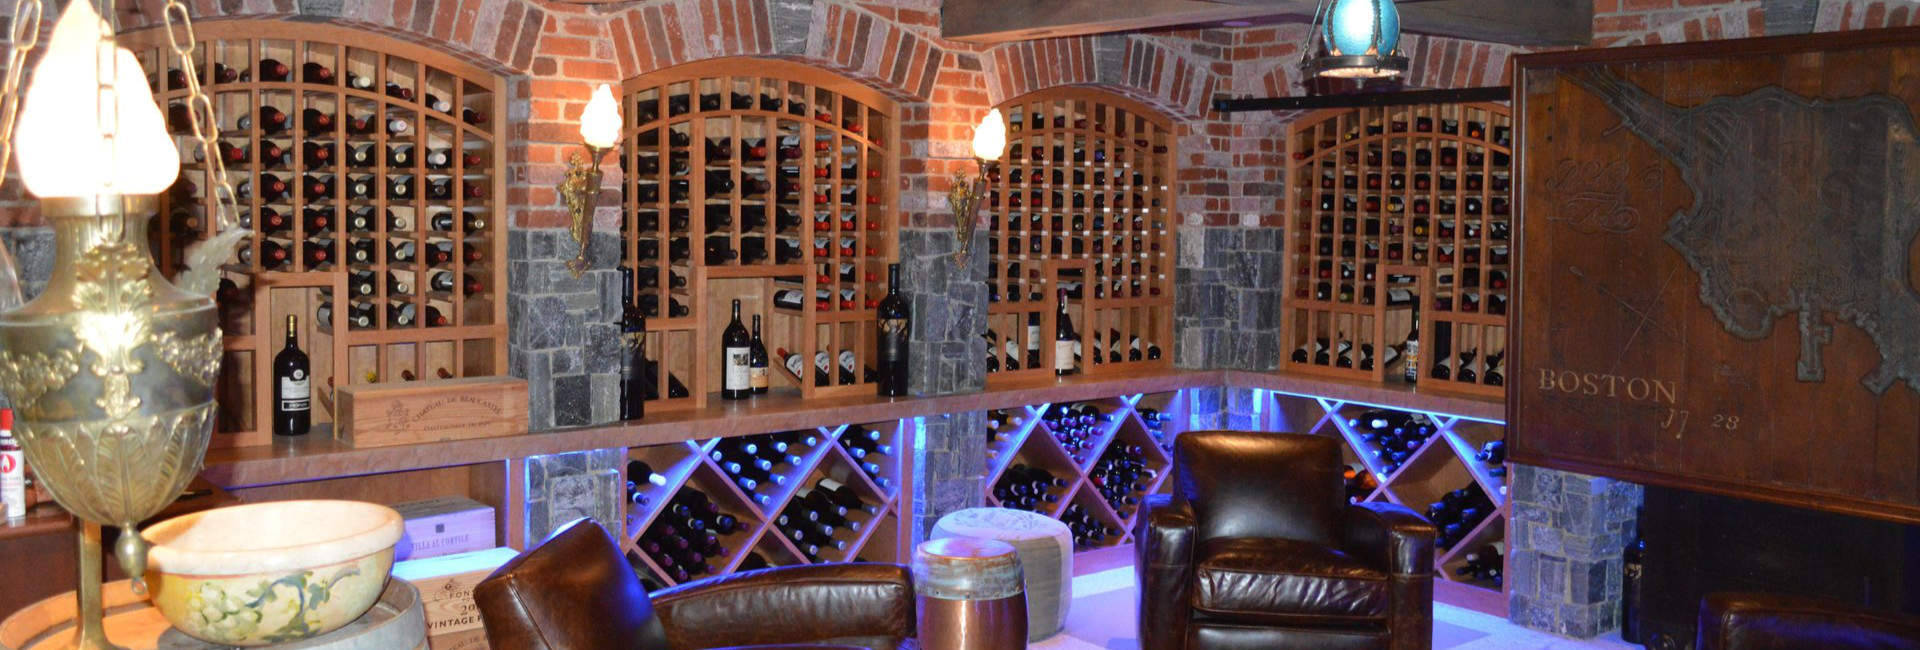 We've crafted hundreds of beautiful residential wine cellars by hand that appeal to all the senses.